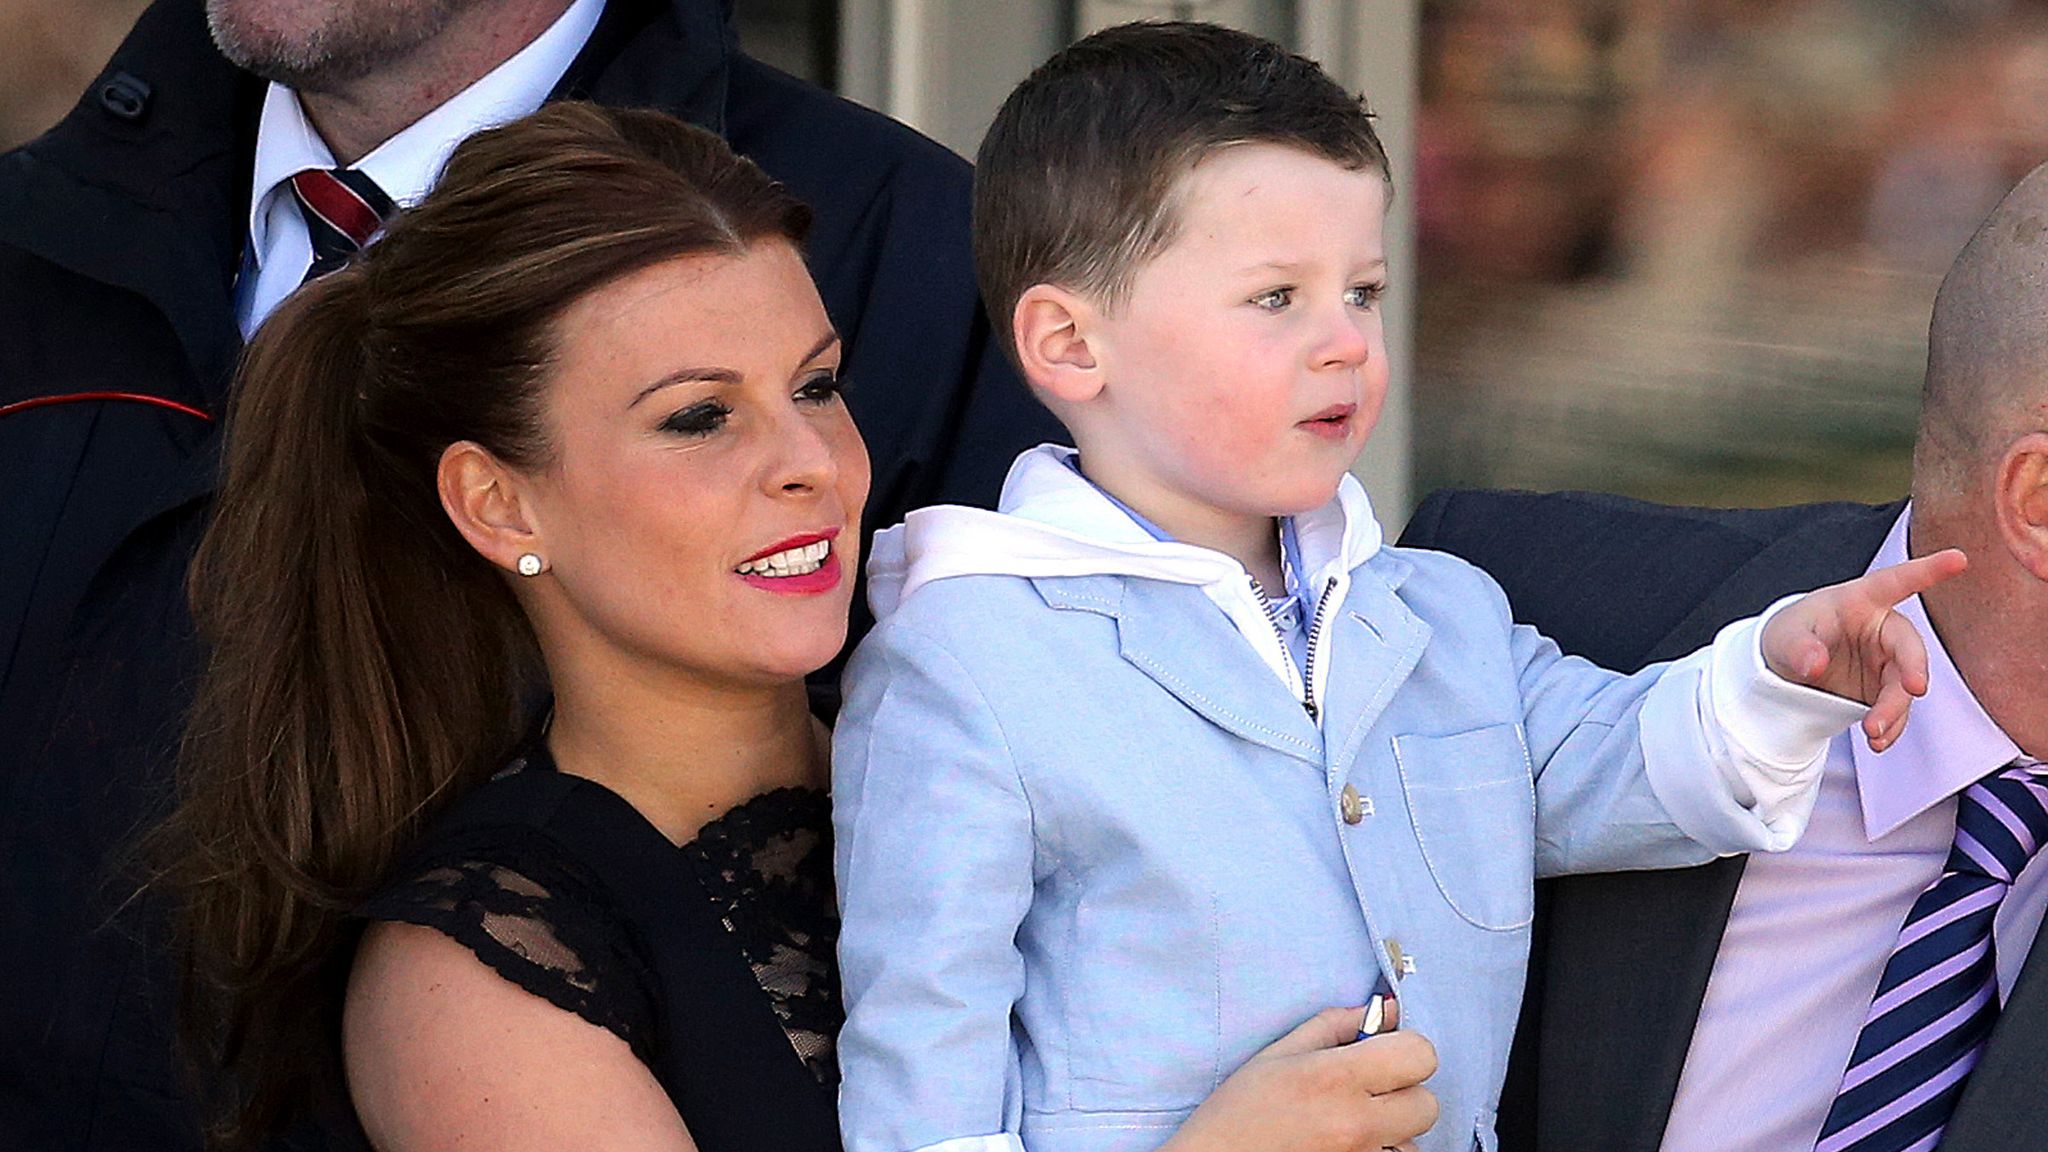 Coleen Rooney with her son Kai pictured in 2013. Pic: AP